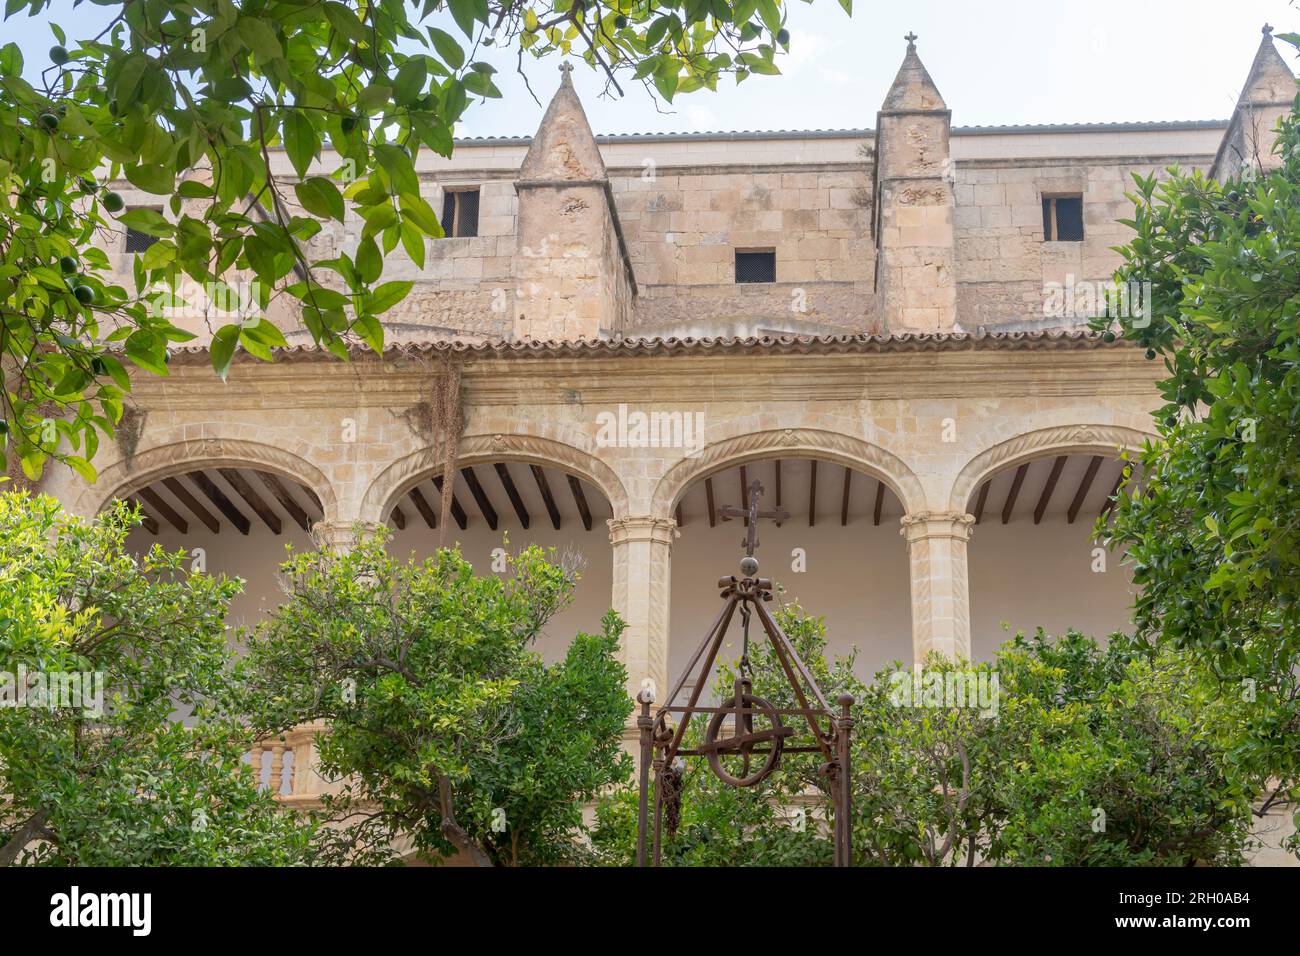 Cloister of the San Vicente Ferrer church in the Majorcan town of Manacor, Spain Stock Photo